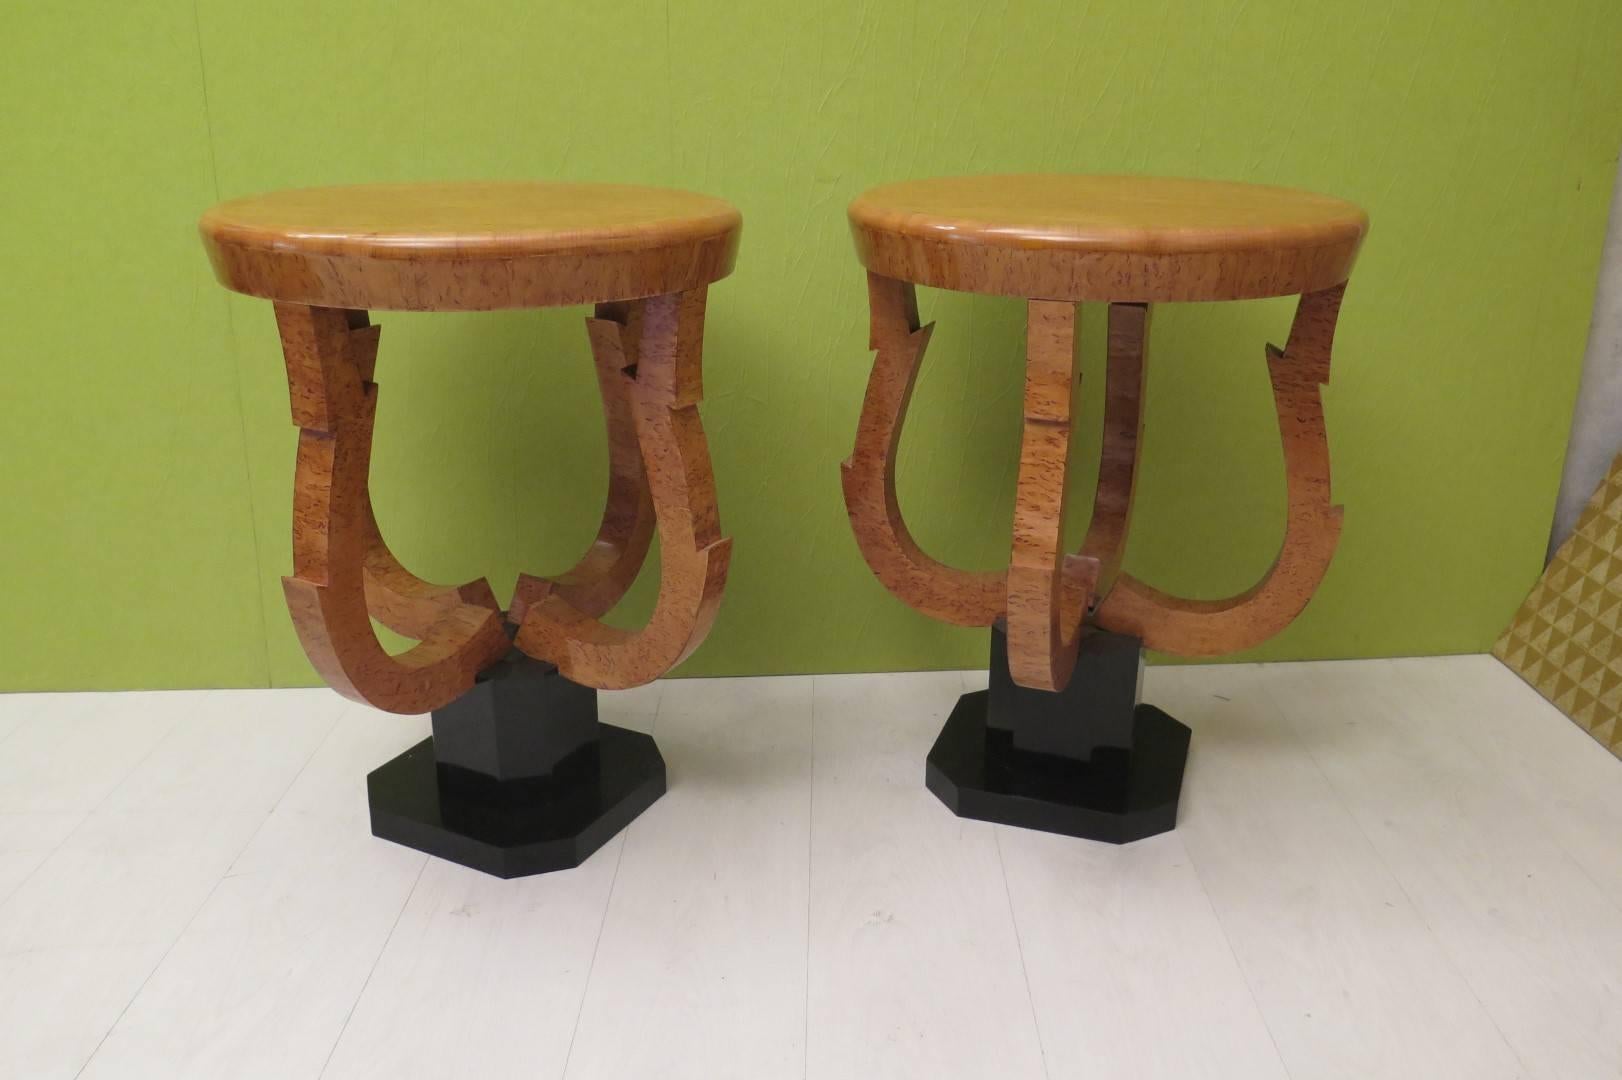 Pair of Art Deco side tables, all veneered in birch burl wood, with black lacquered foot. Notably the design of the legs. Very nice and stylish this pair of side tables beside a sofa.